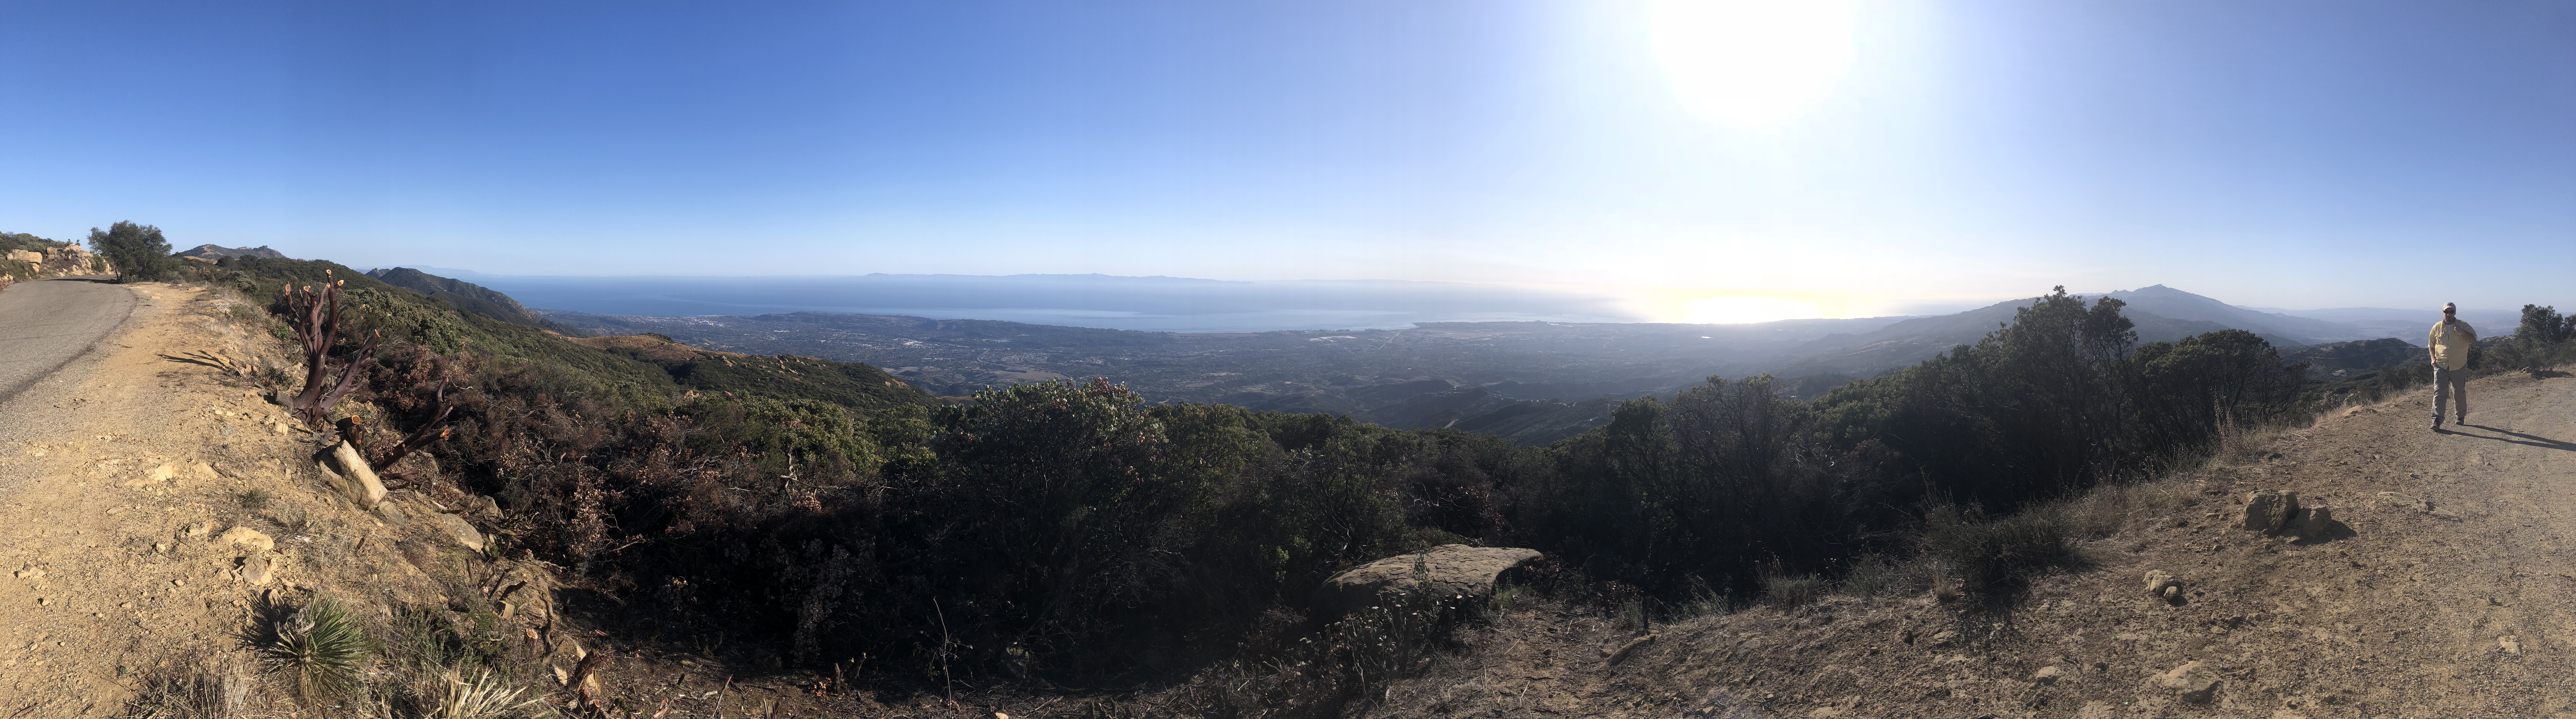 The view of Santa Barbara from the mountains